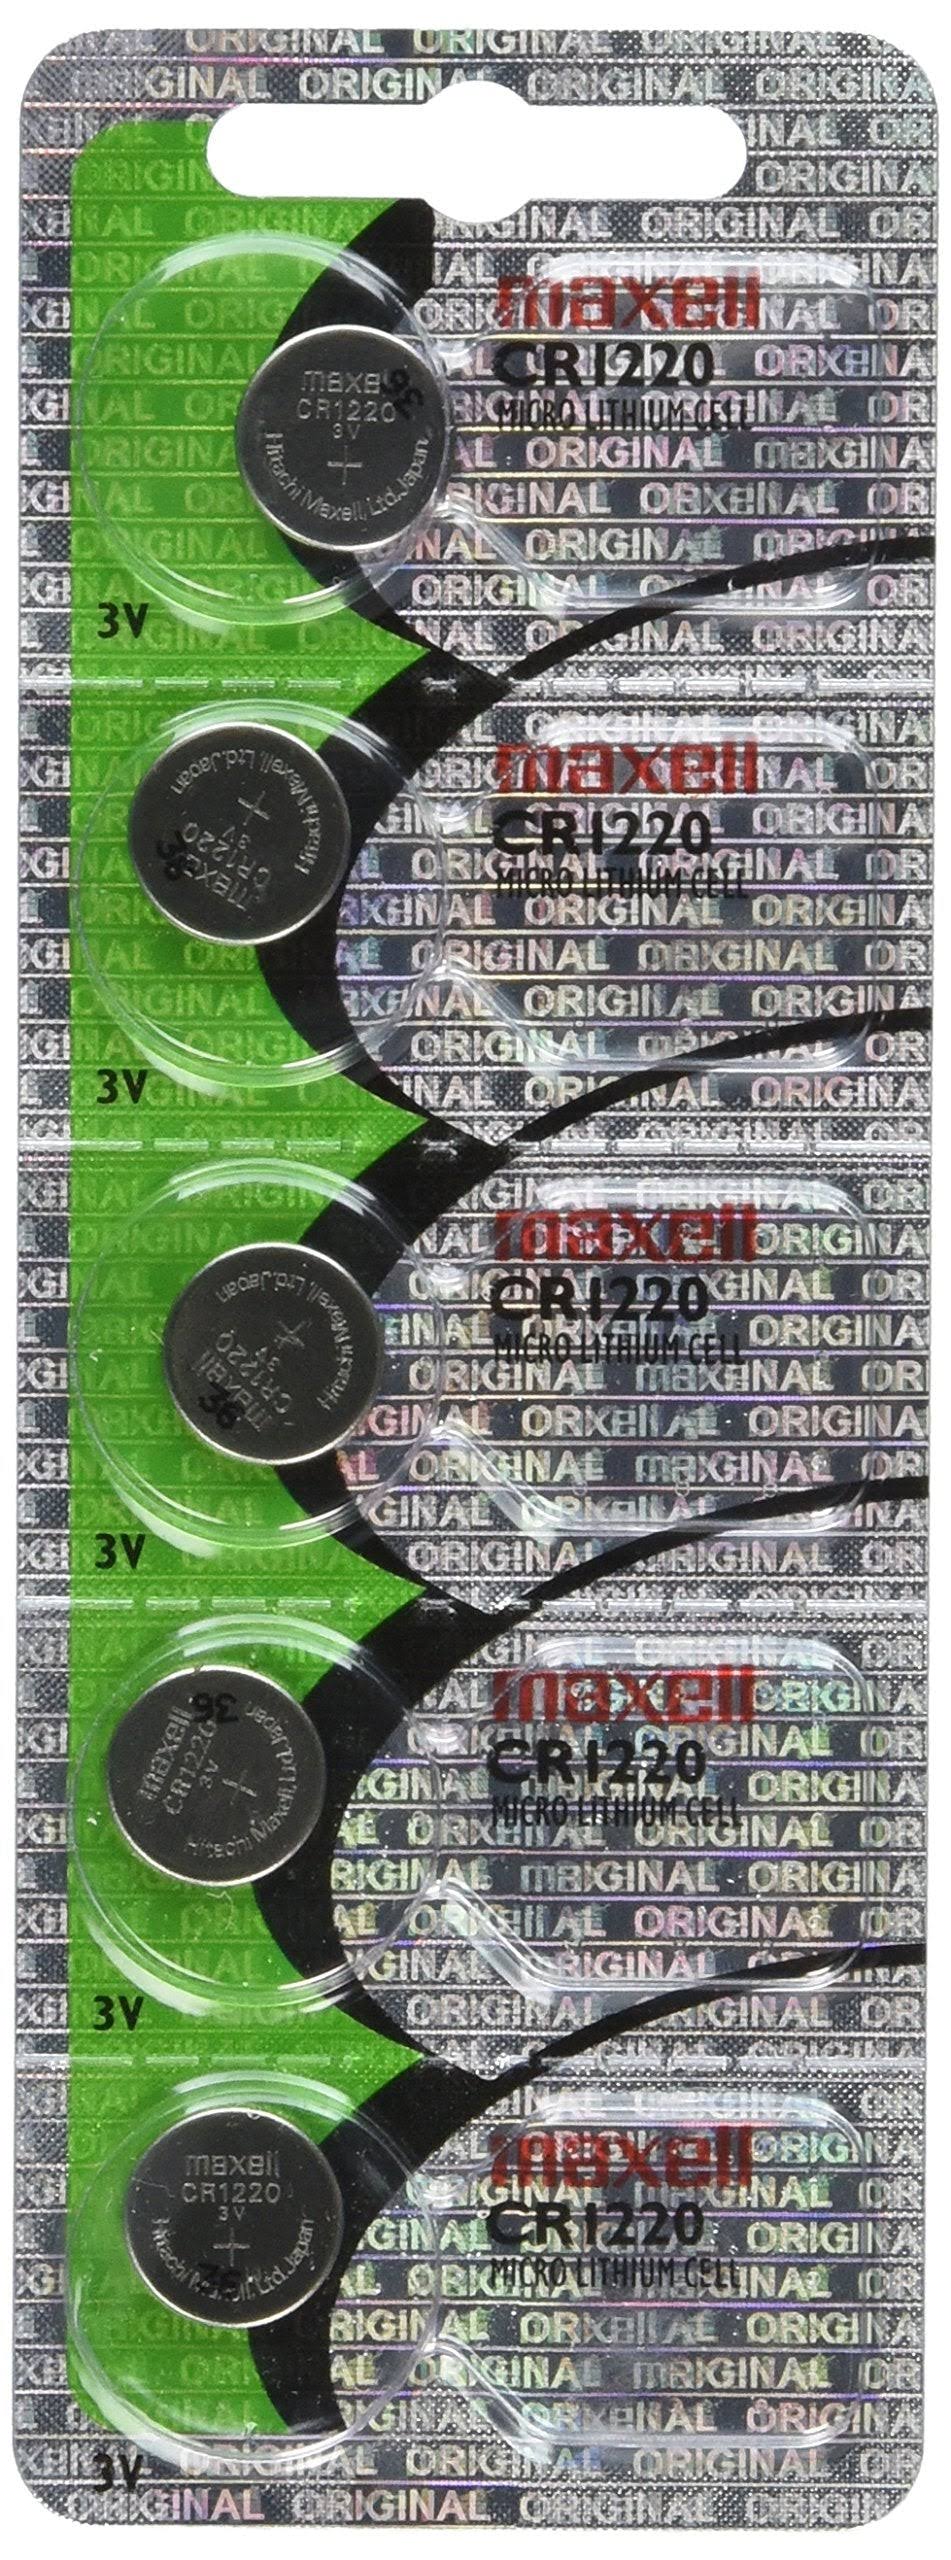 Maxell Lithium Coin Cell Watch Batteries - 5pk, 3V